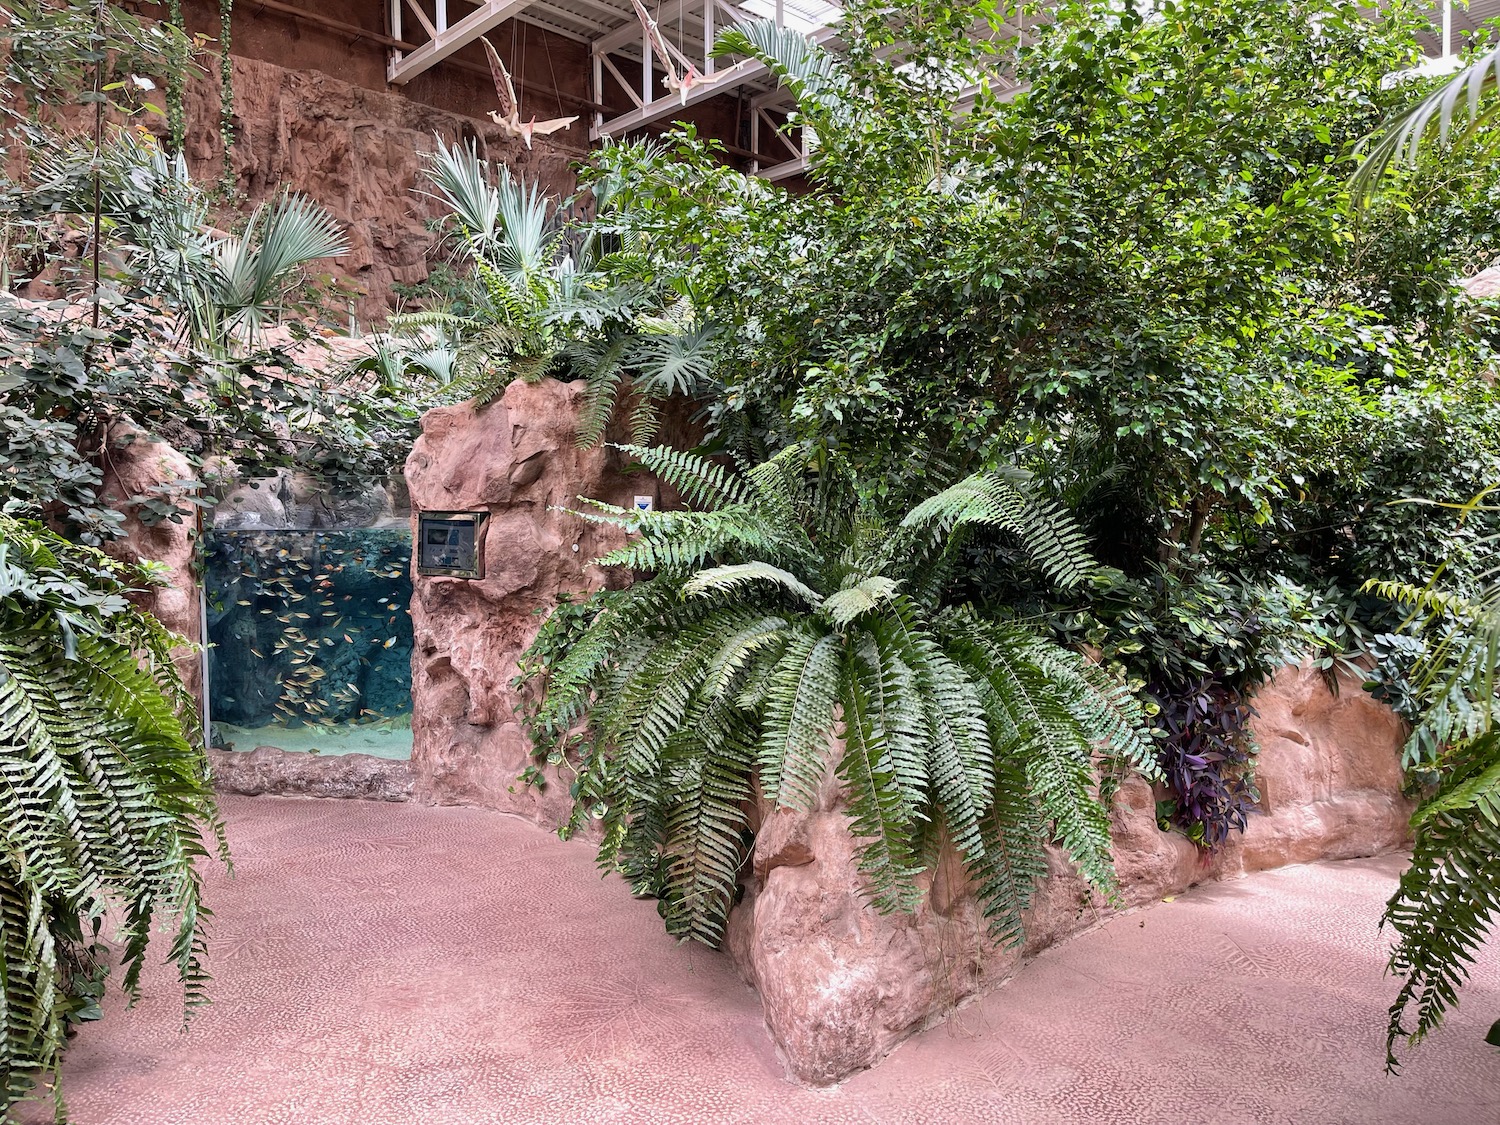 a large rock wall with plants and a fish in it